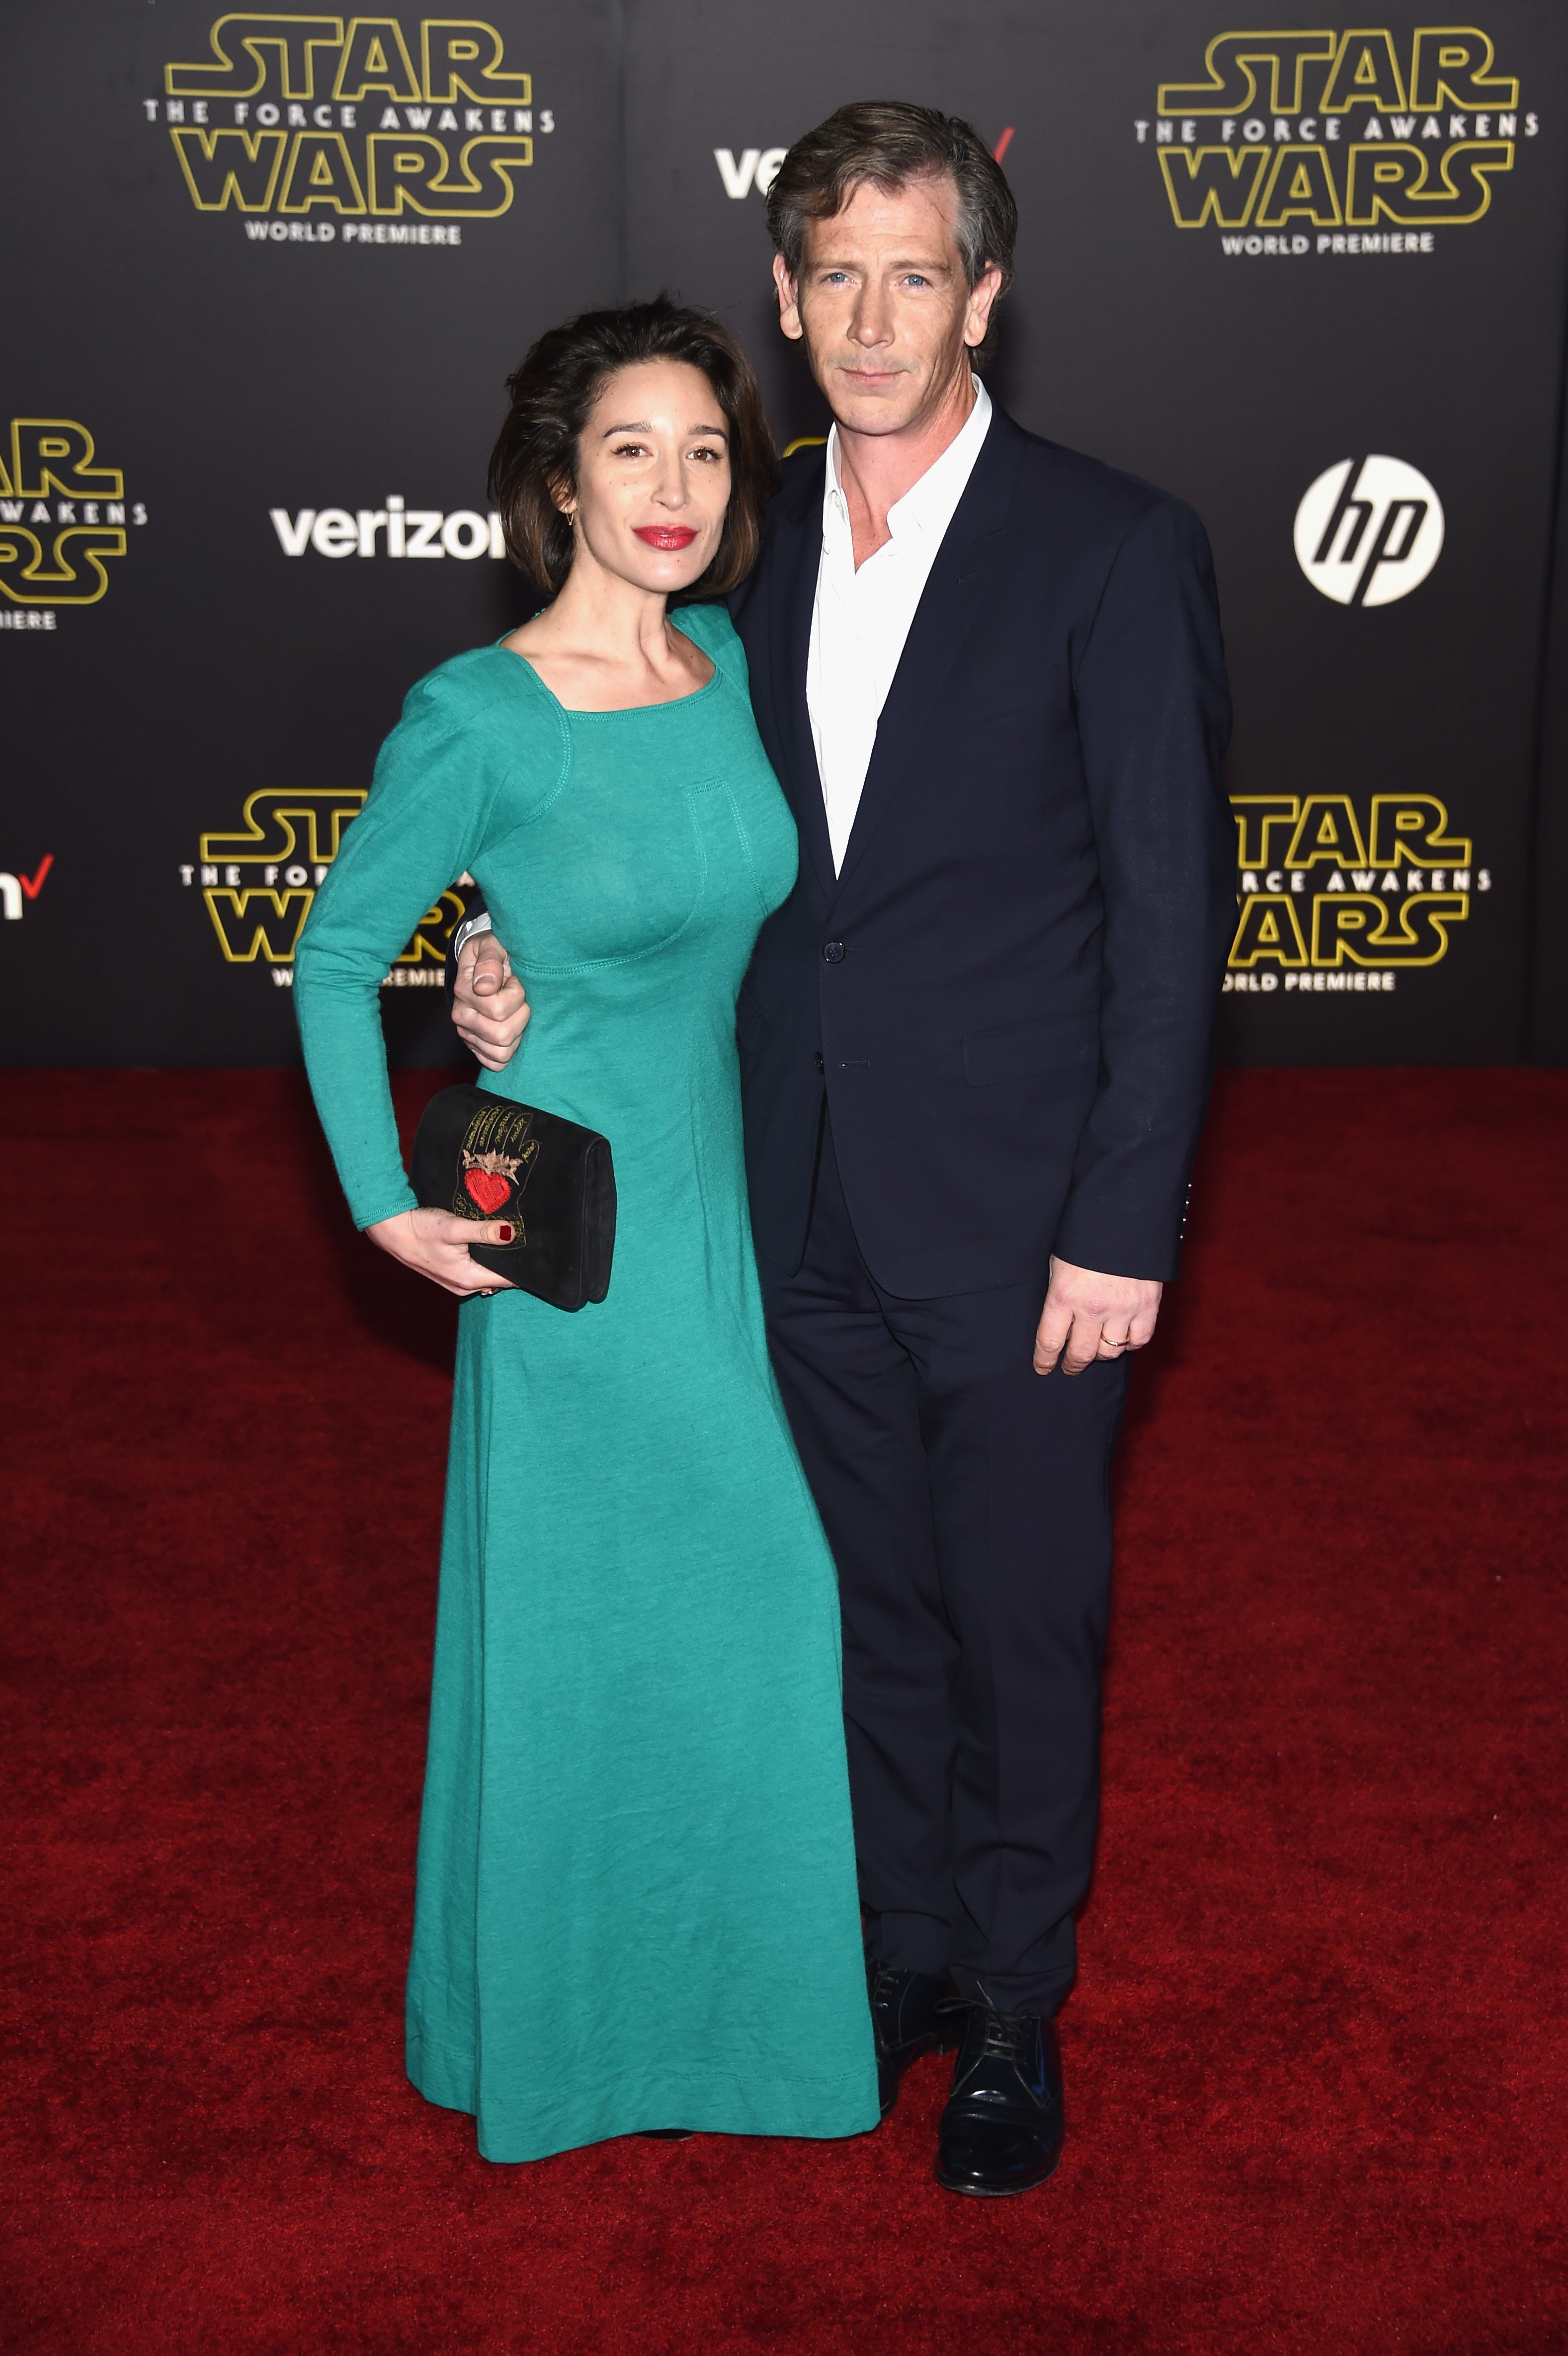 Emma Forrest and Ben Mendelsohn at the premiere of "Star Wars: The Force Awakens" on December 14, 2015 in Hollywood, California. | Source: Getty Images